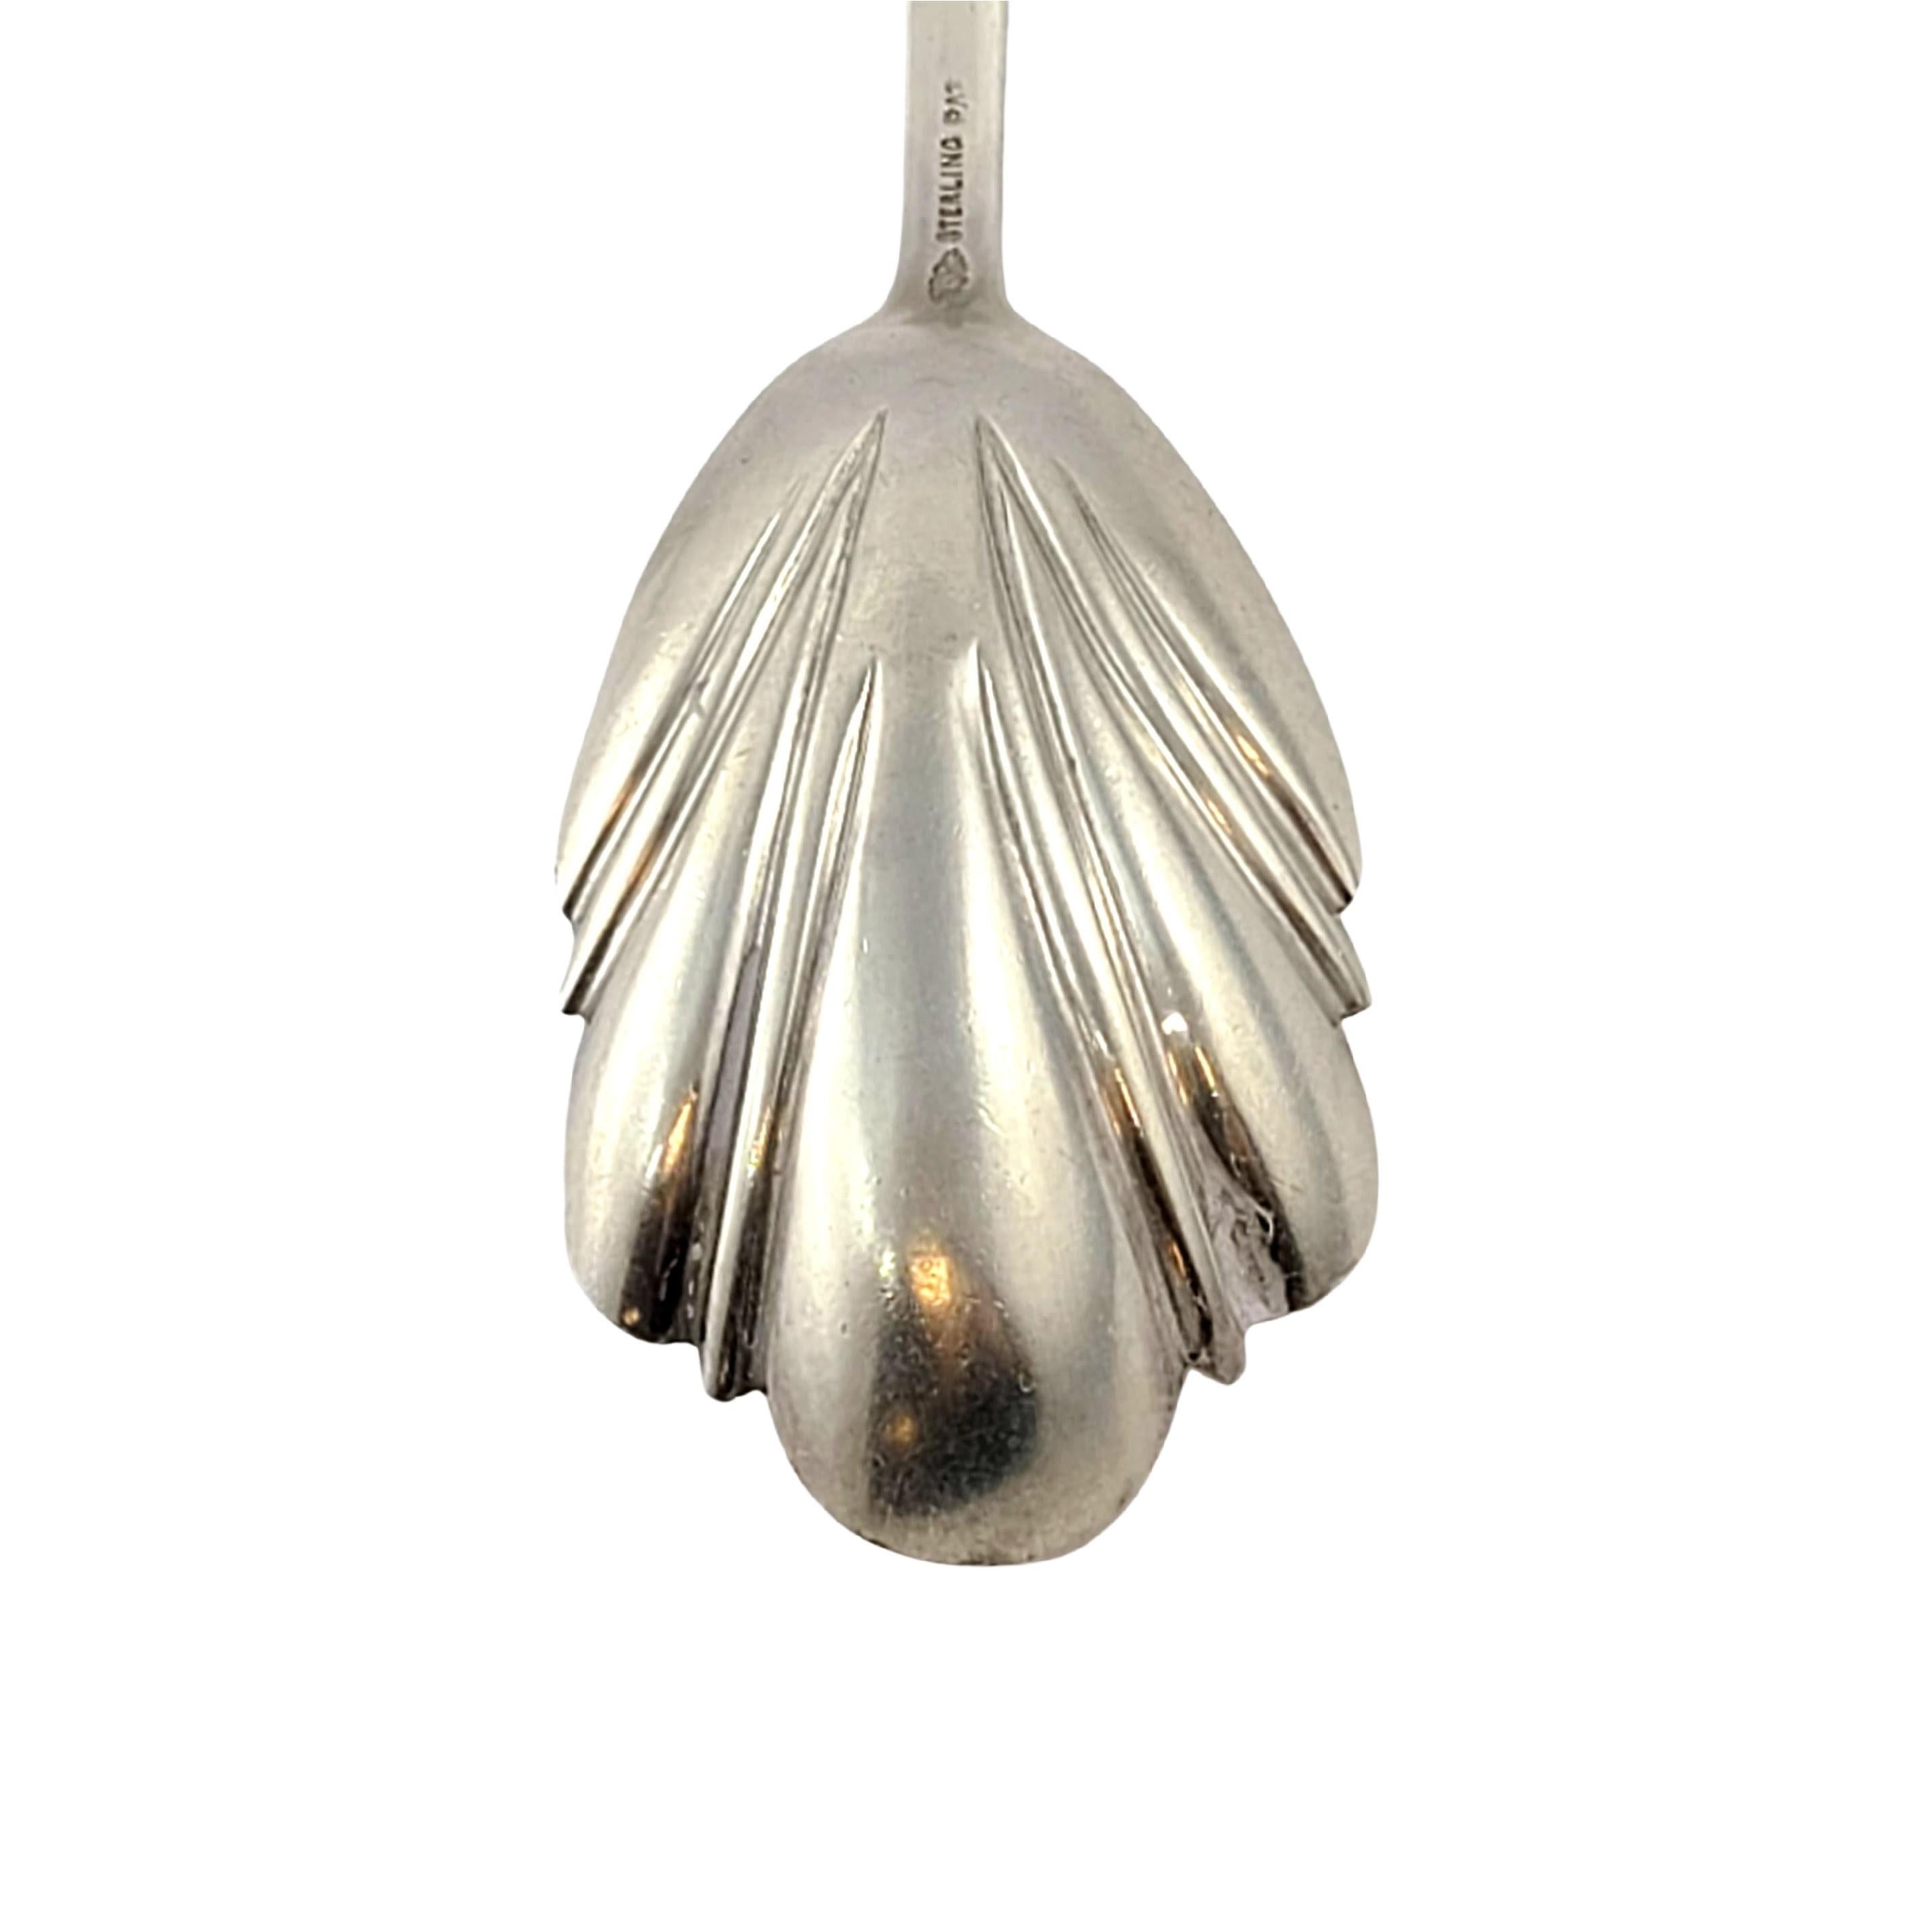 Women's or Men's George W Shiebler Sterling Silver No 1 Pattern Shell Bowl Sugar Spoon For Sale